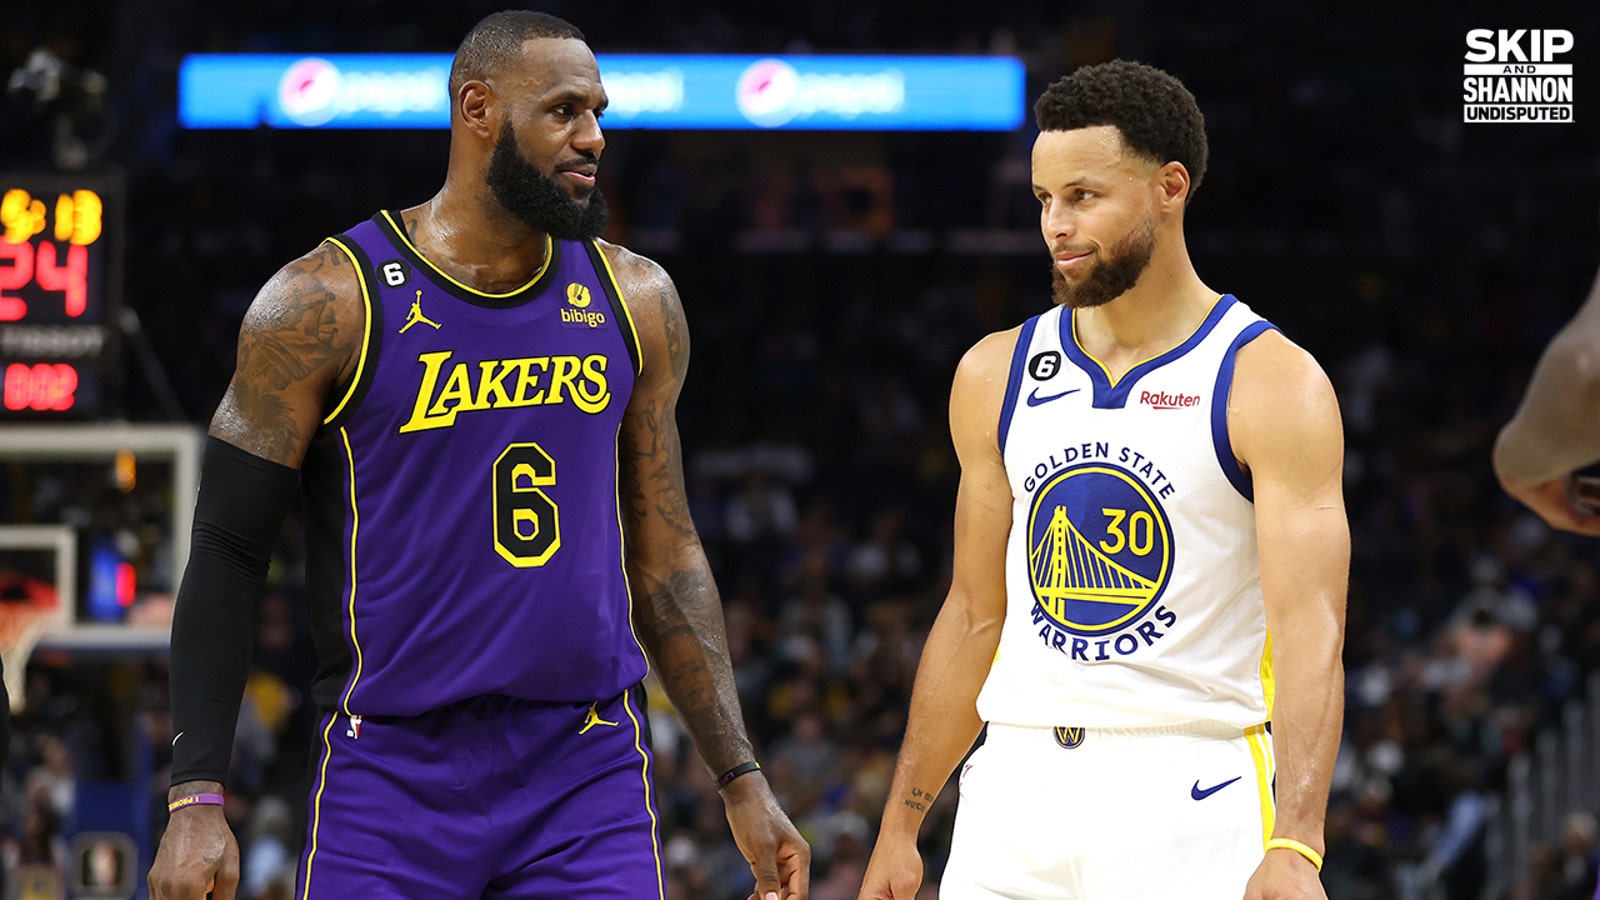 Steph Curry's Warriors blow out Lakers 